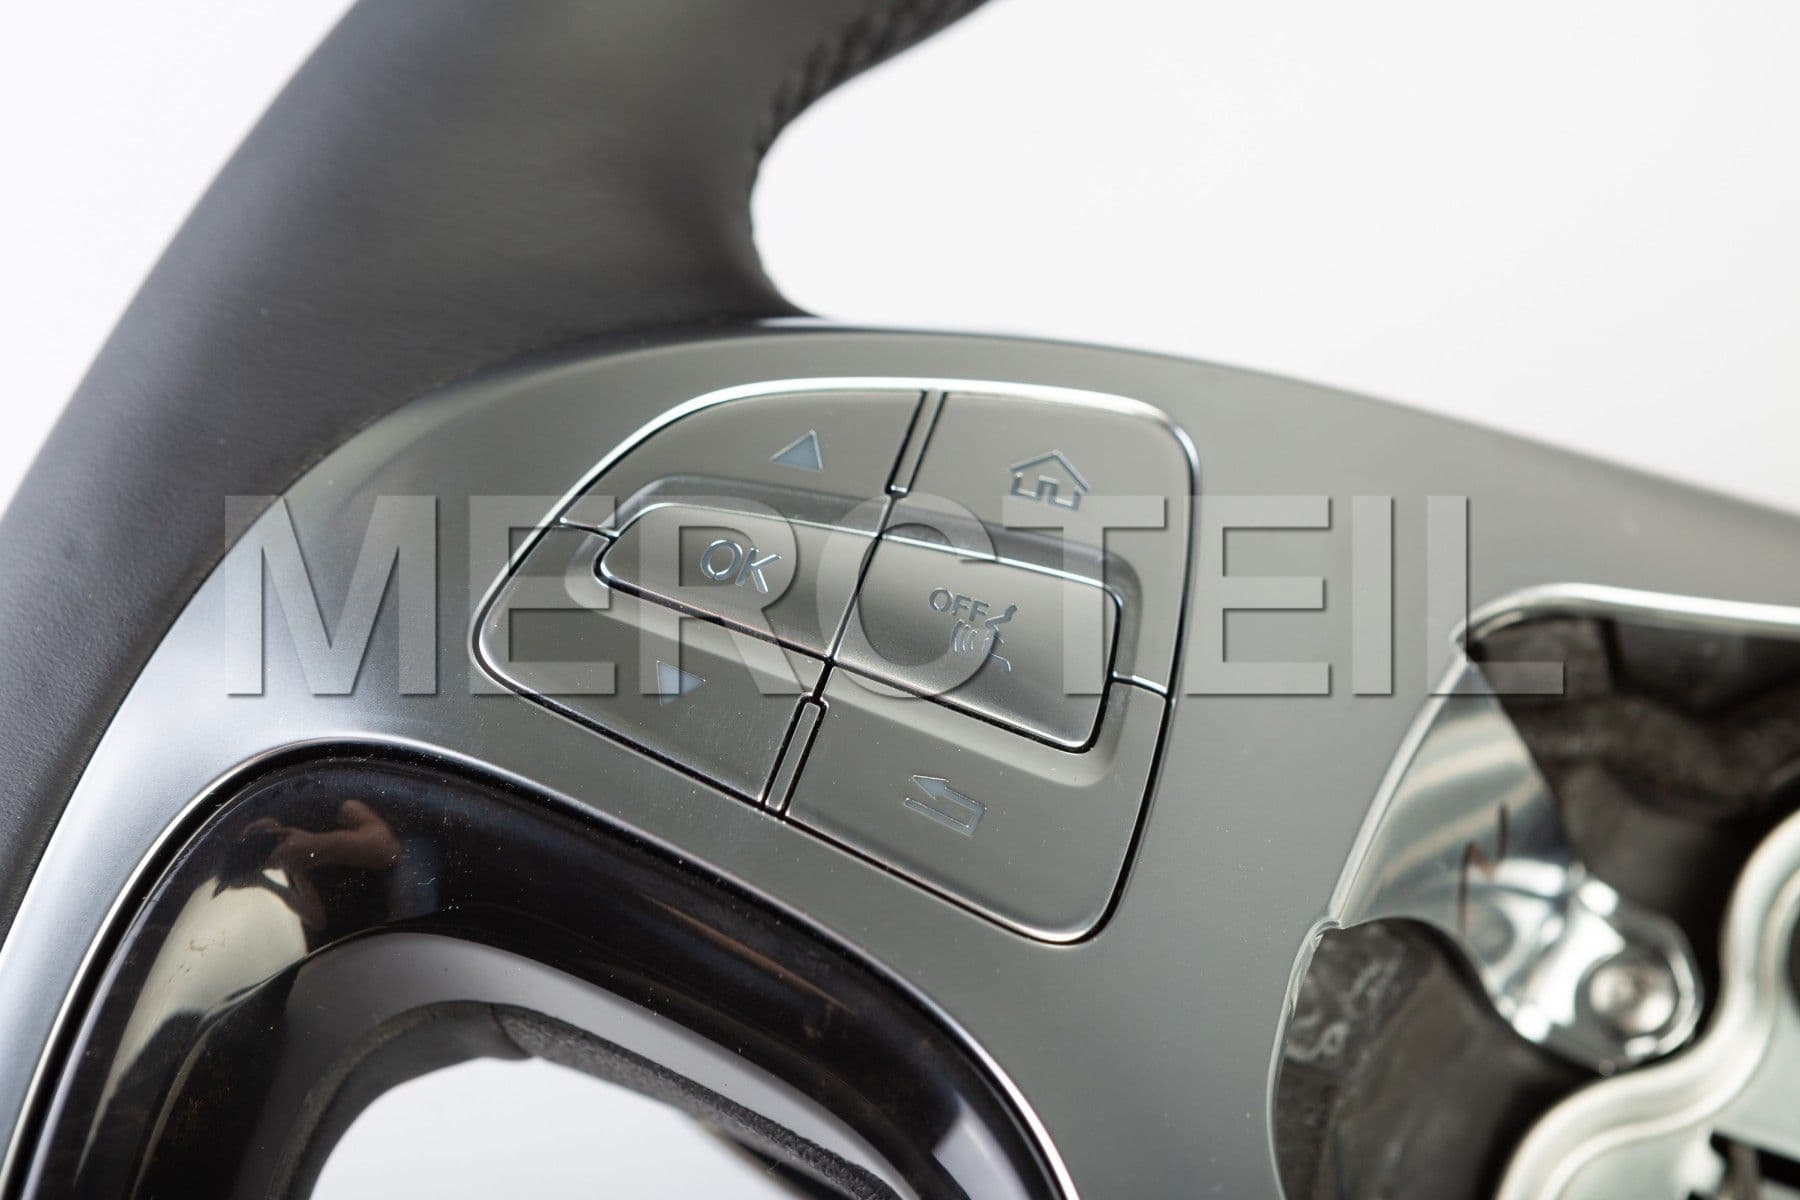 Leather Black Steering Wheel With Poplar Trims for S-Class (part number: 	
A00246015039E38)